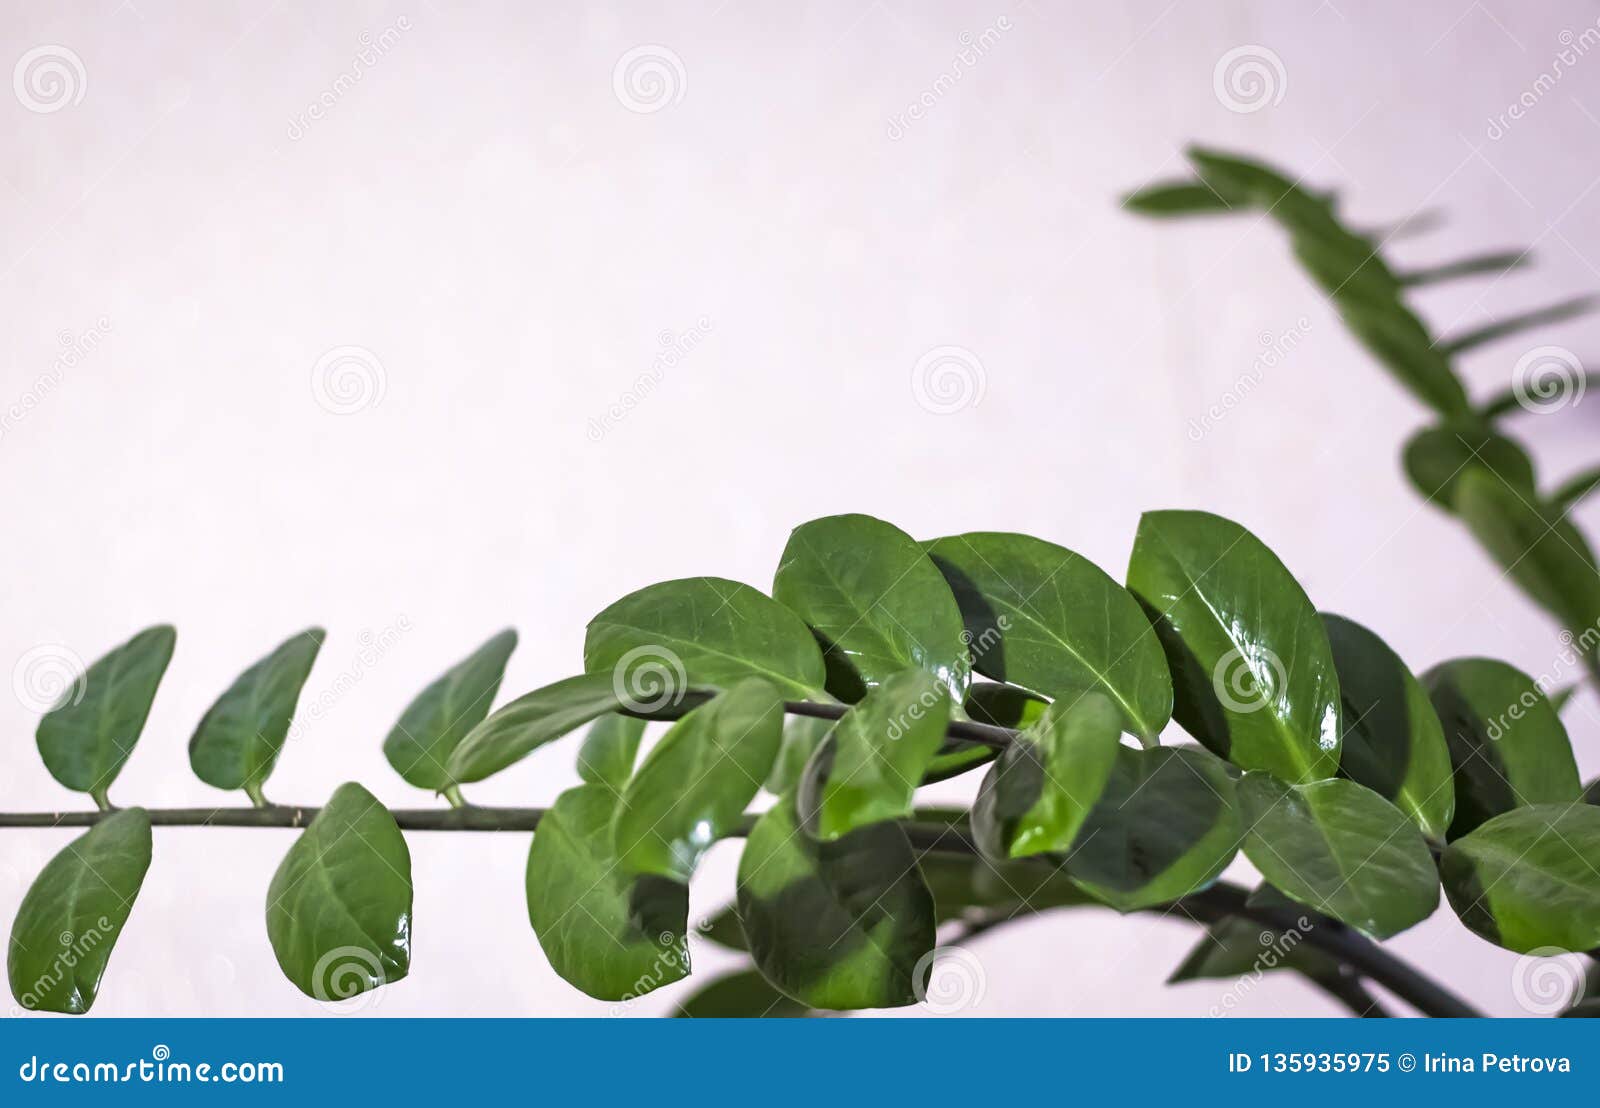 Leaves of Dollar Tree Close-up. Dollar Tree on Beige Background Stock